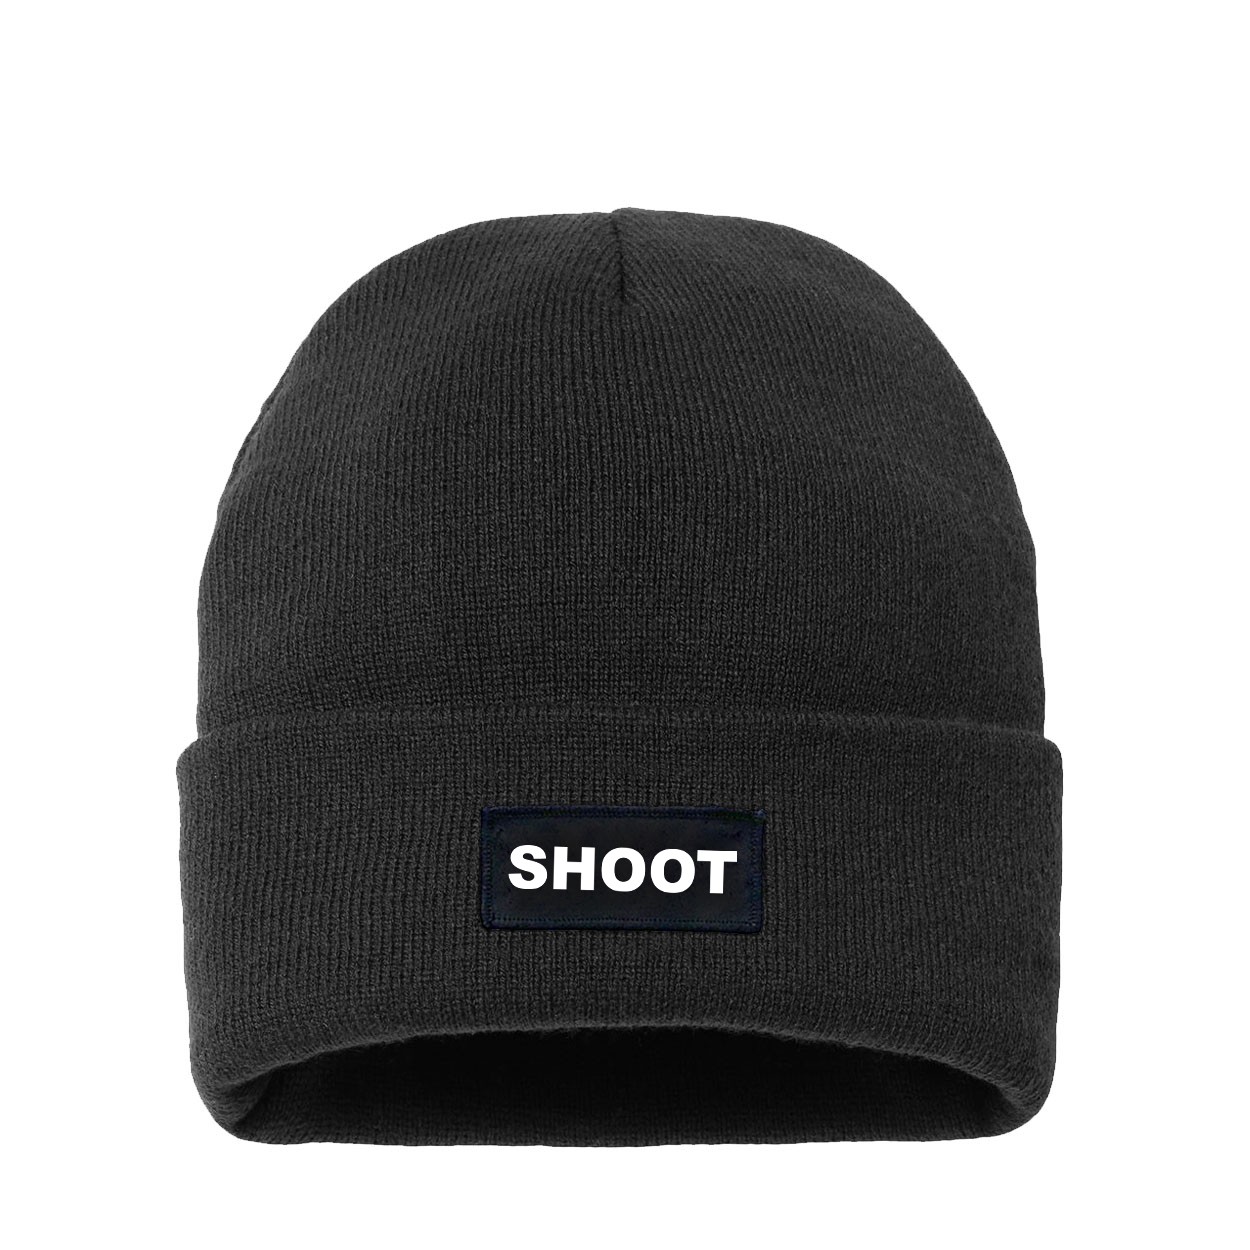 Shoot Brand Logo Night Out Woven Patch Night Out Sherpa Lined Cuffed Beanie Black